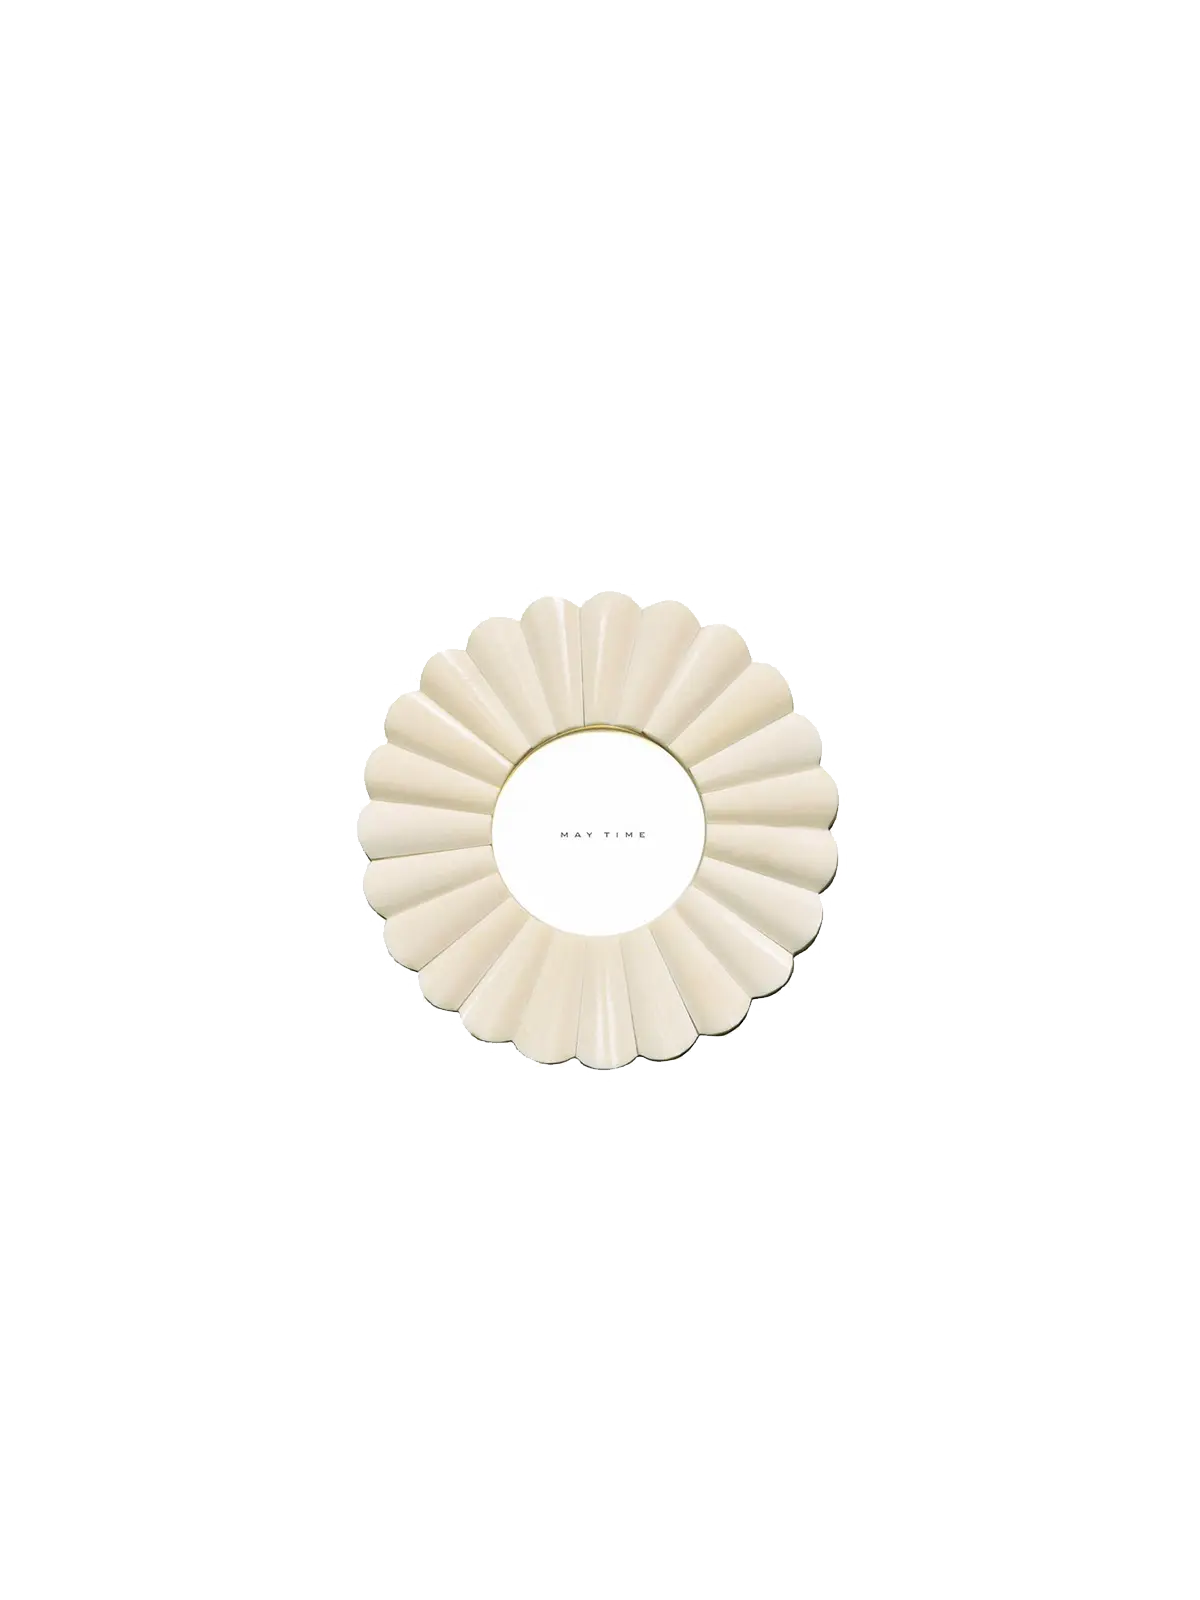 Single Scalloped Round Cream Frame May Time